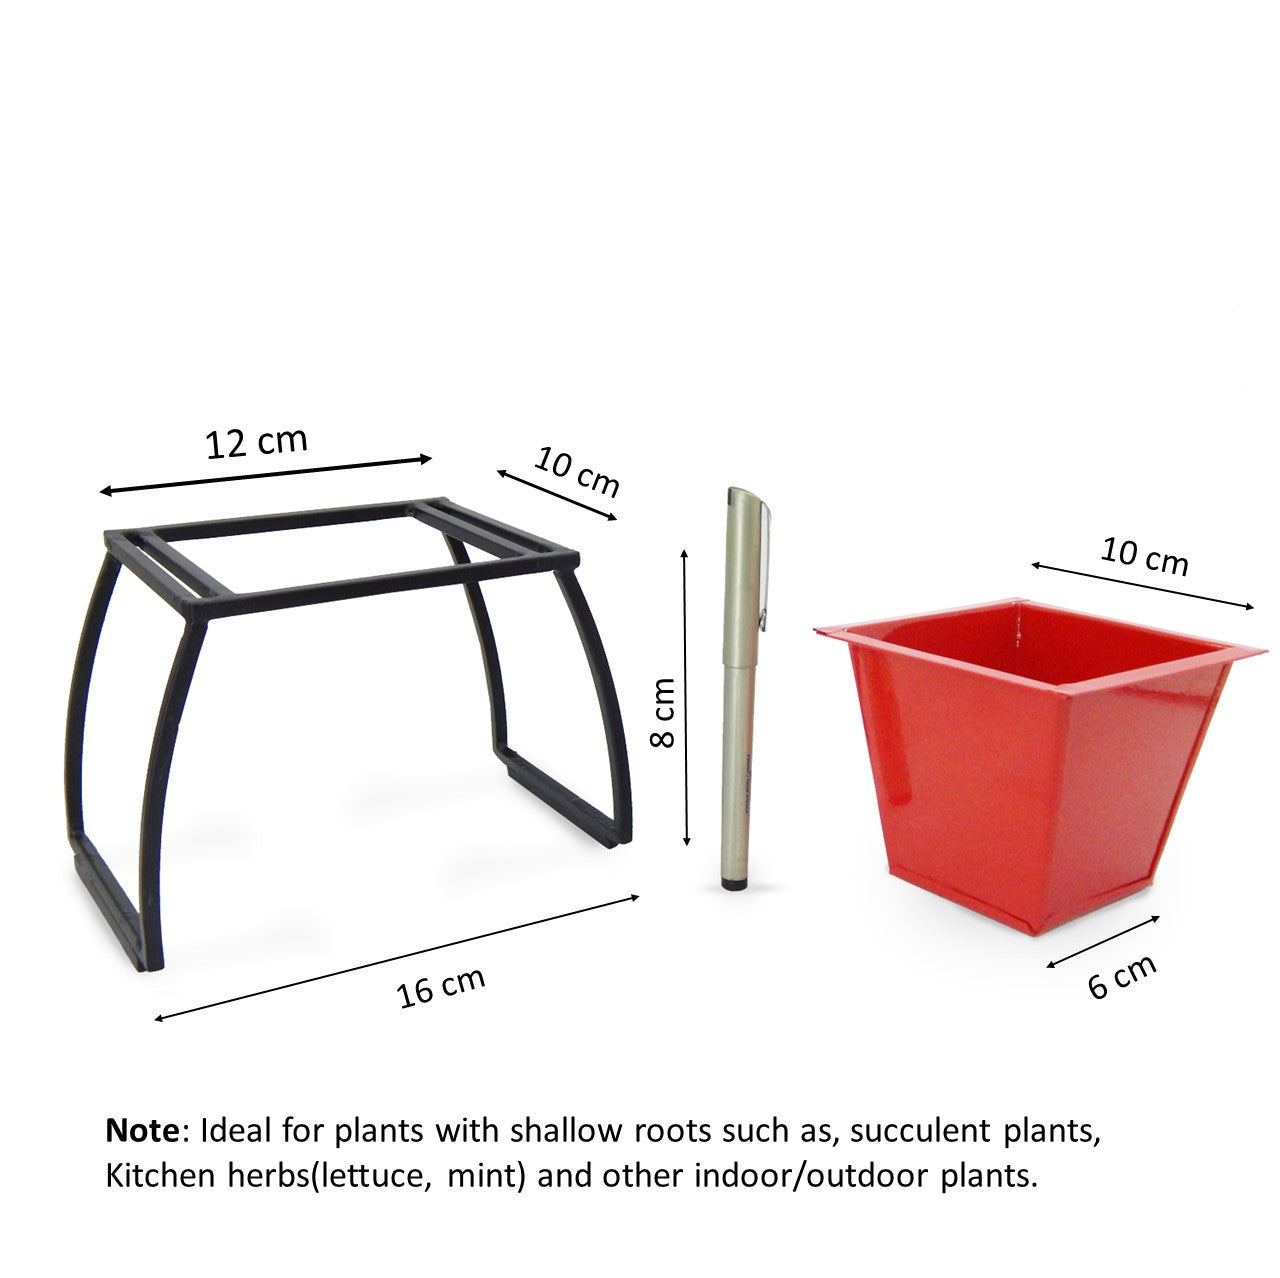 ecofynd Stackable Table Top Planter Pot with Metal Stand, Red Desktop Planter freeshipping - Ecofynd